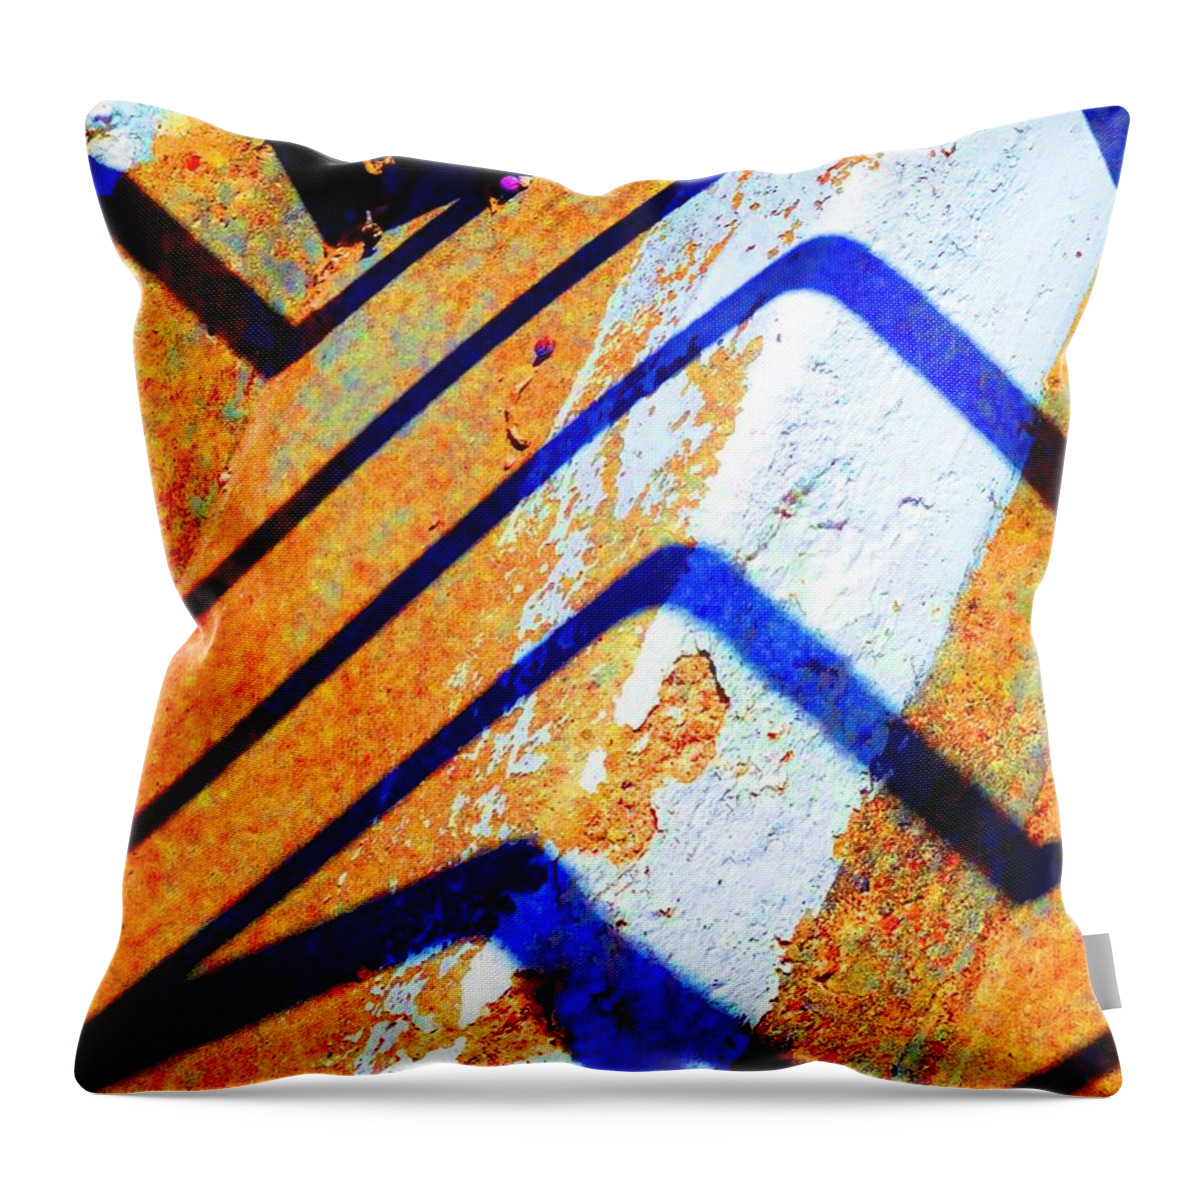 Yellow Throw Pillow featuring the digital art Zig Zag by T Oliver